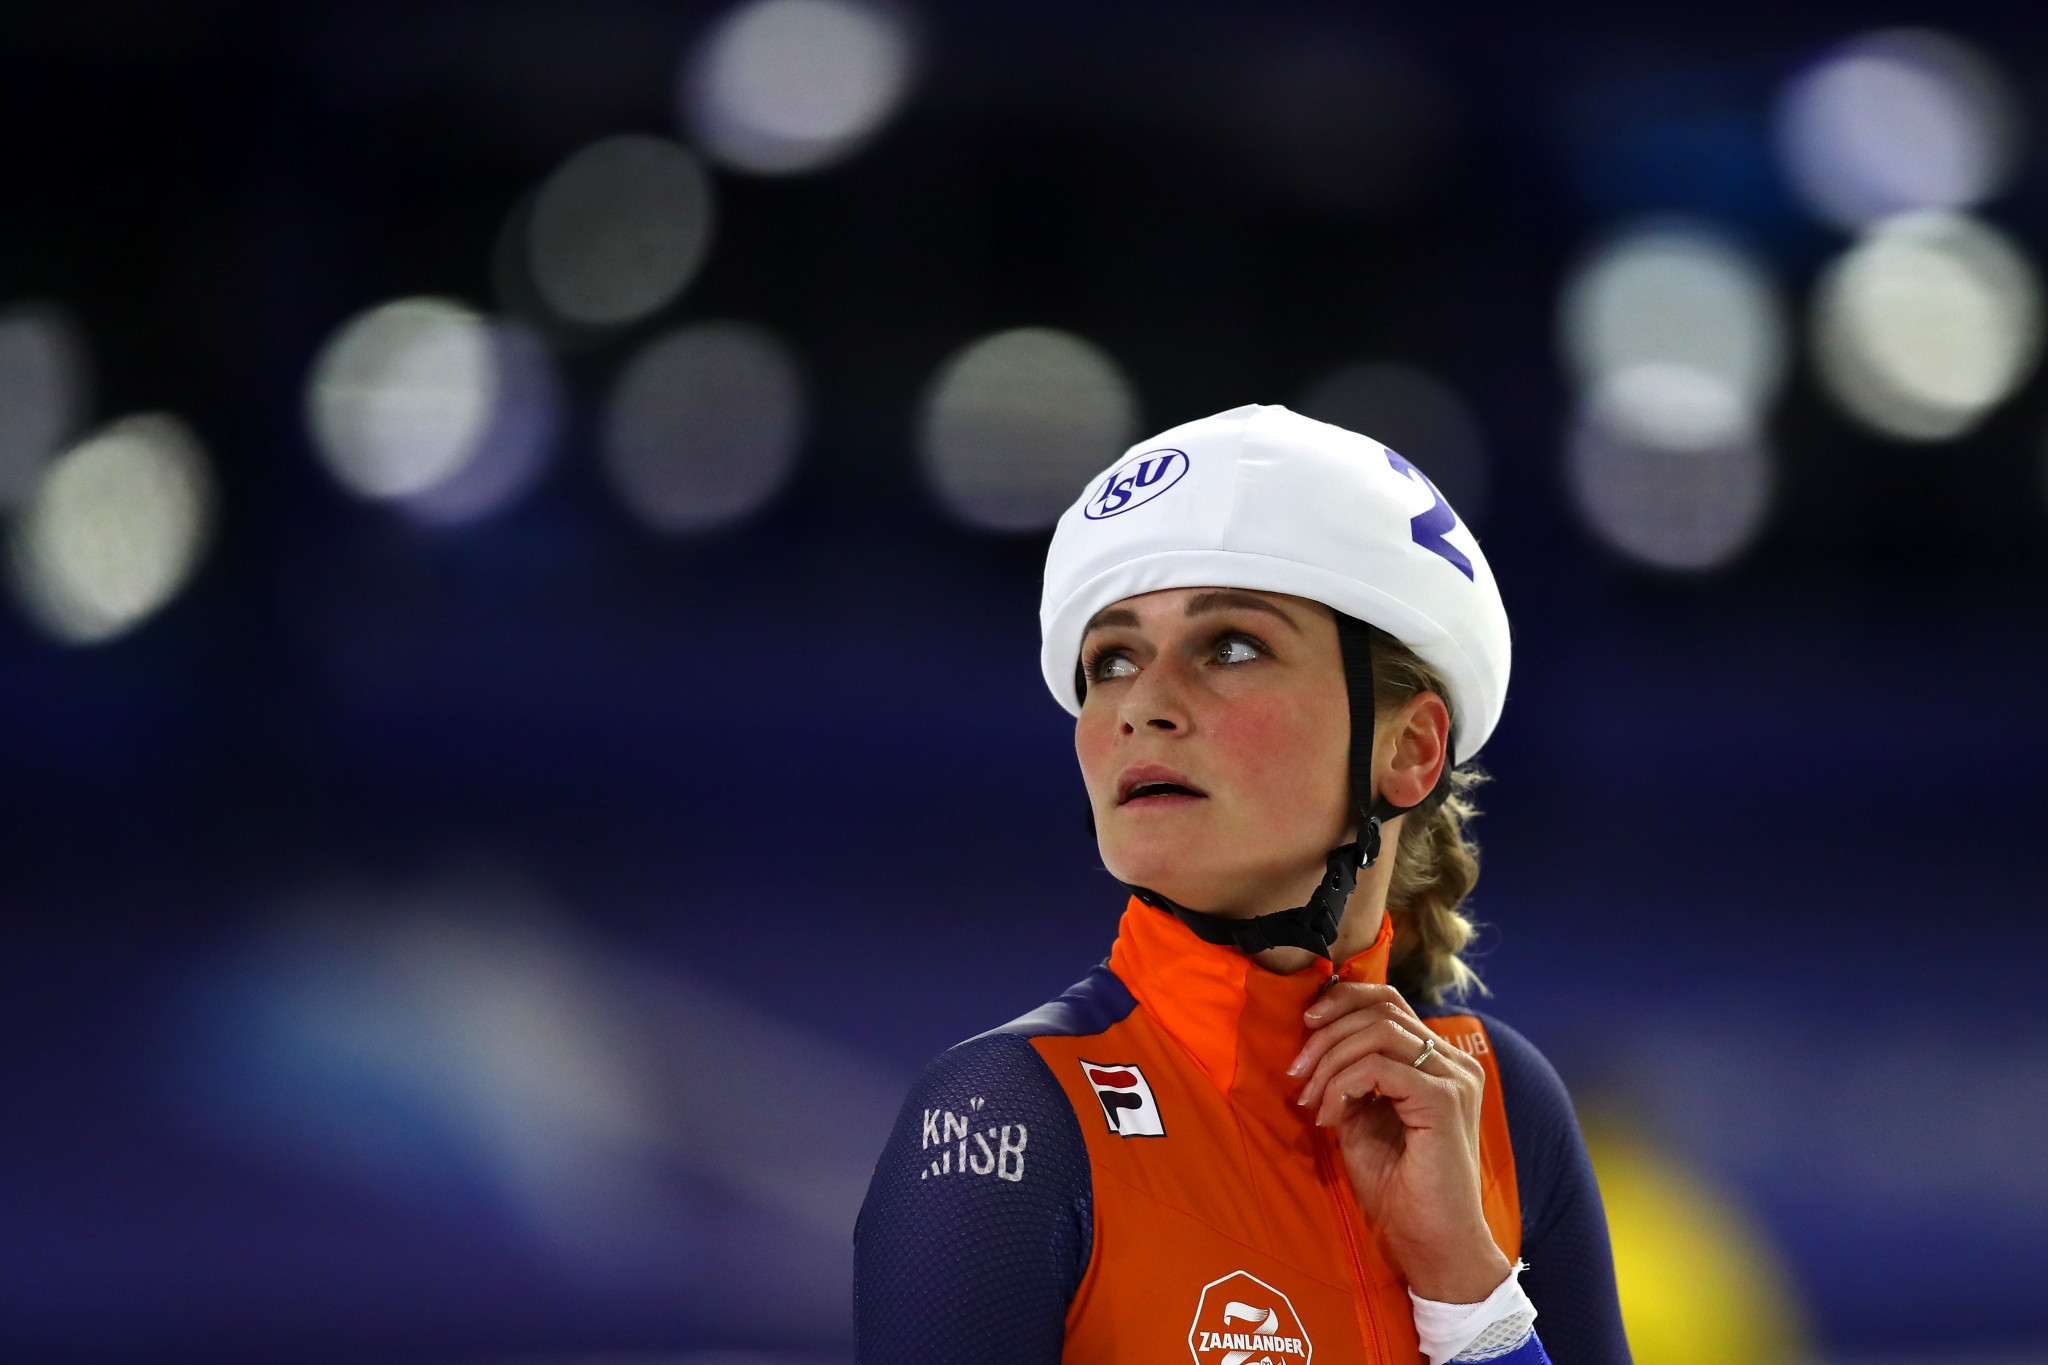 Dutch dominant on day two of ISU Speed Skating World Cup in Heerenveen